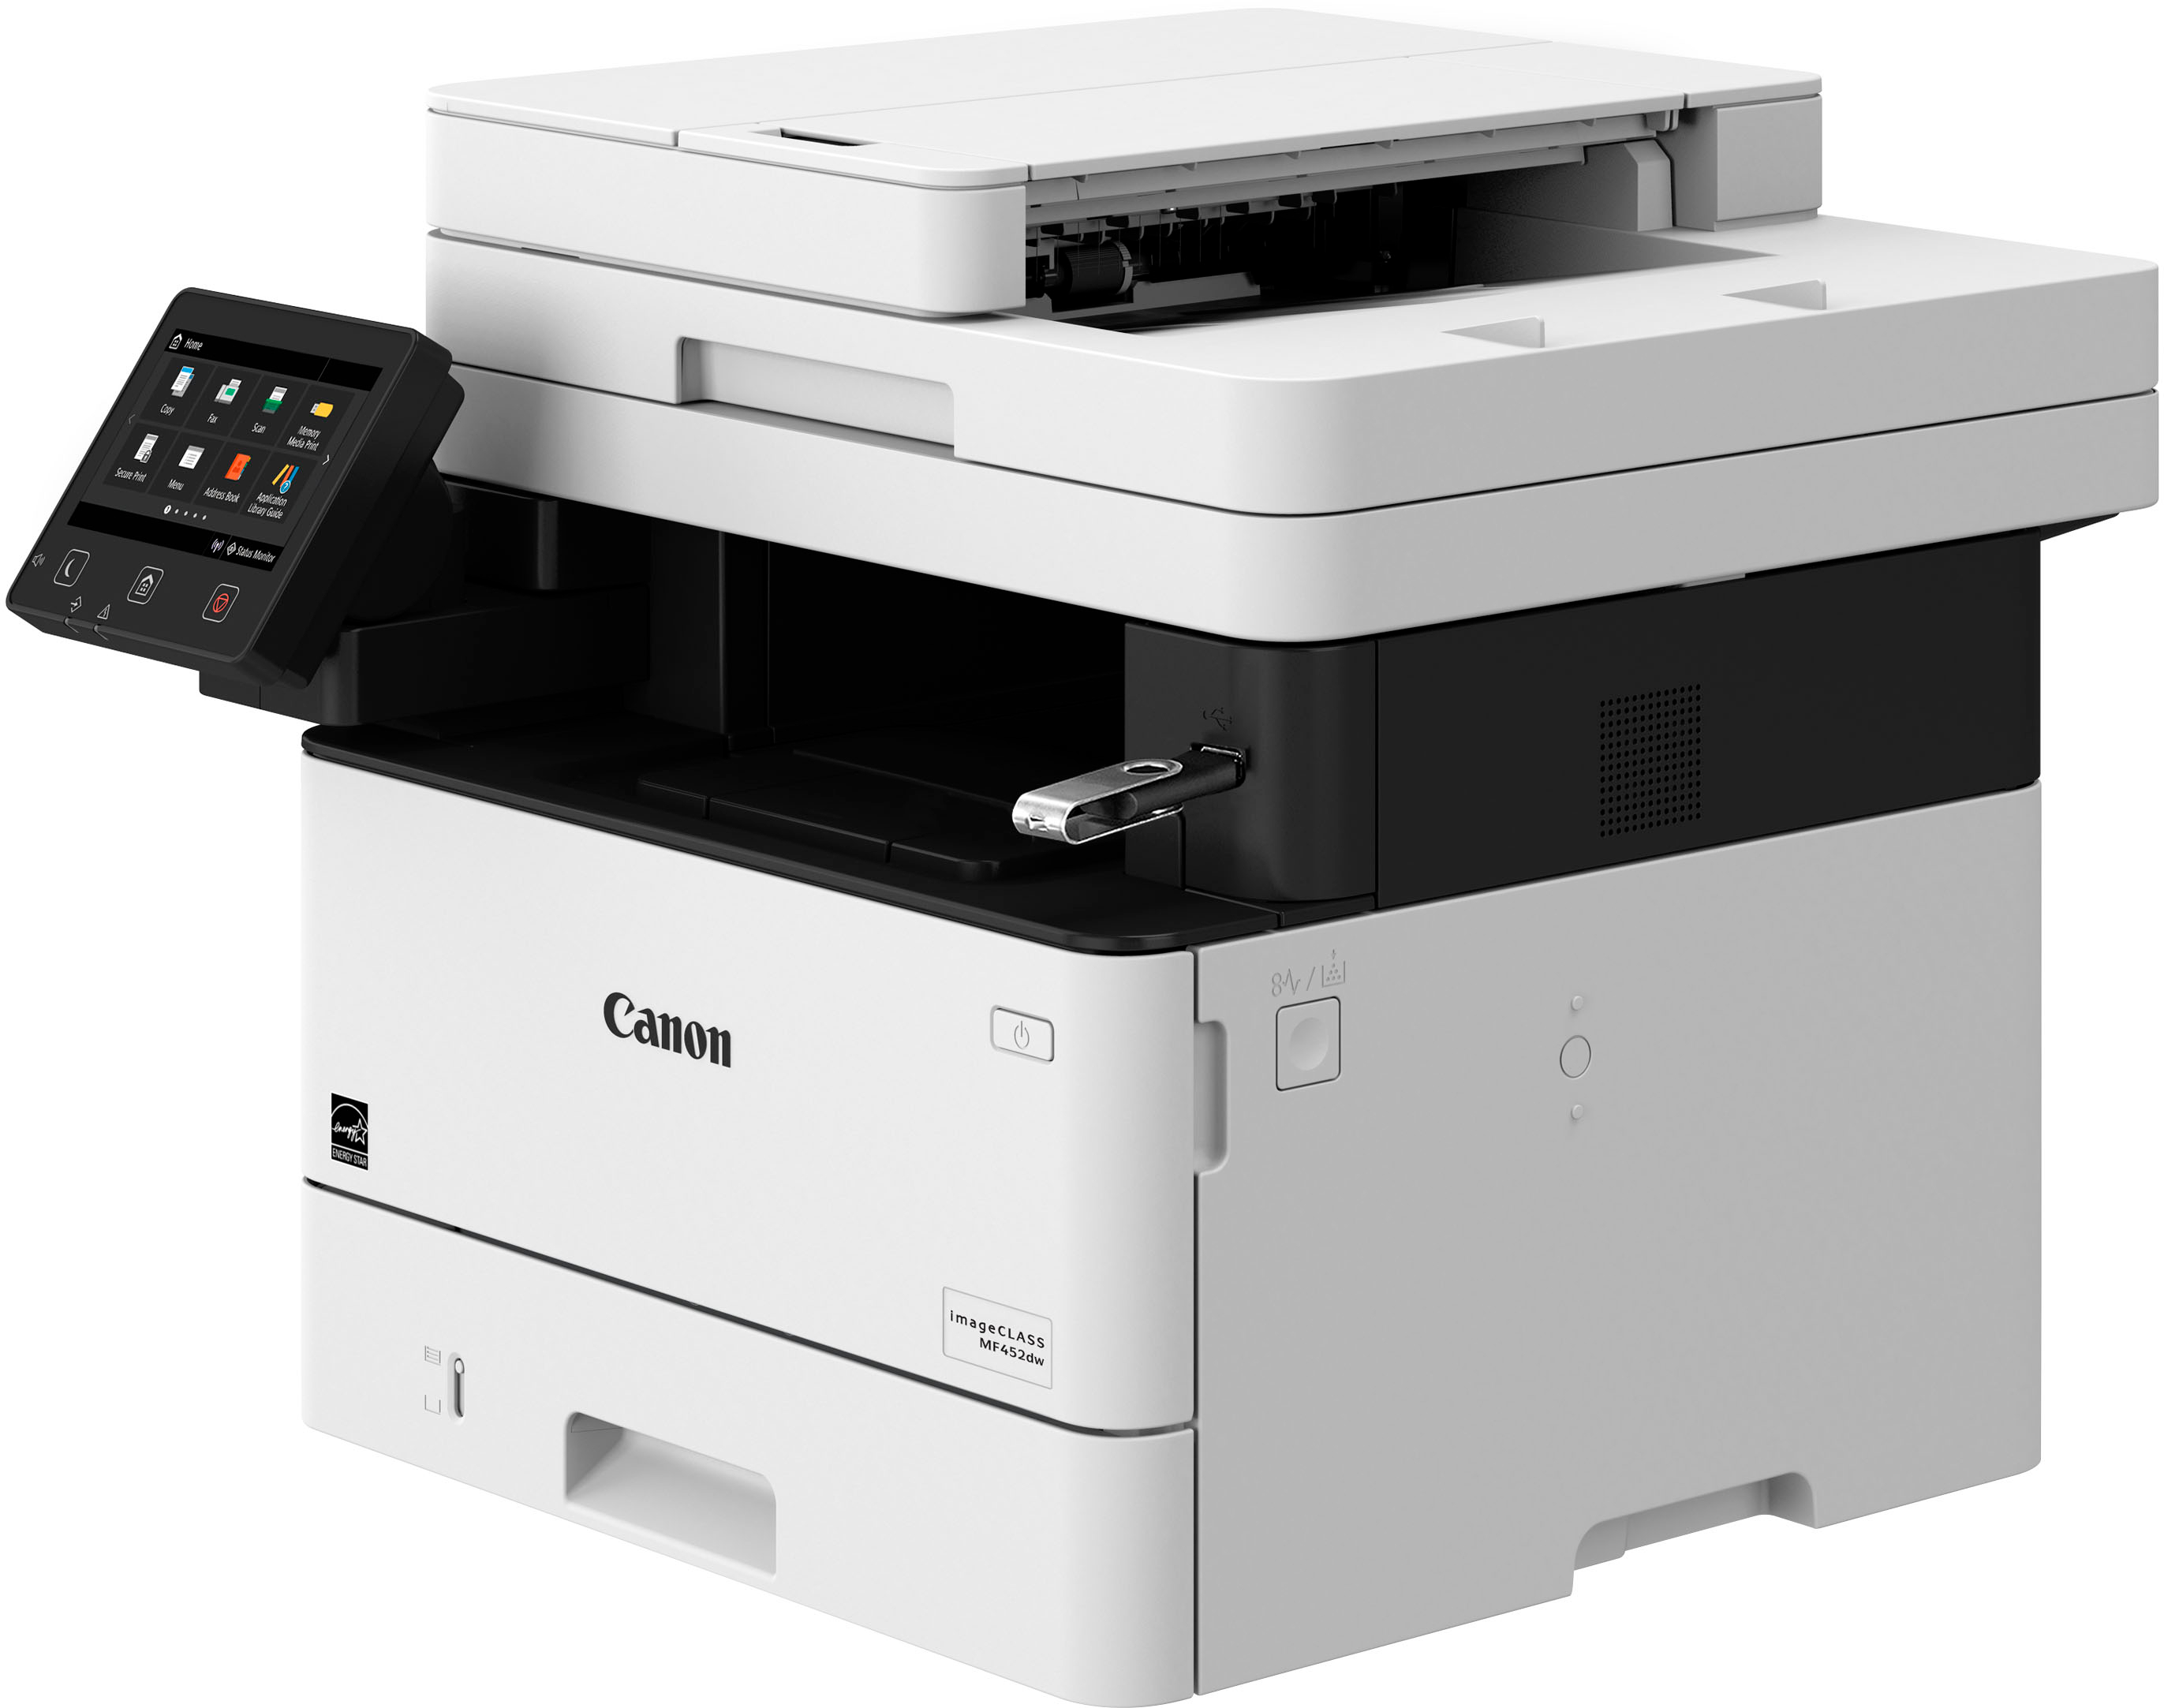 Angle View: Canon - imageCLASS MF452dw Wireless Black-and-White All-In-One Laser Printer with Fax - White